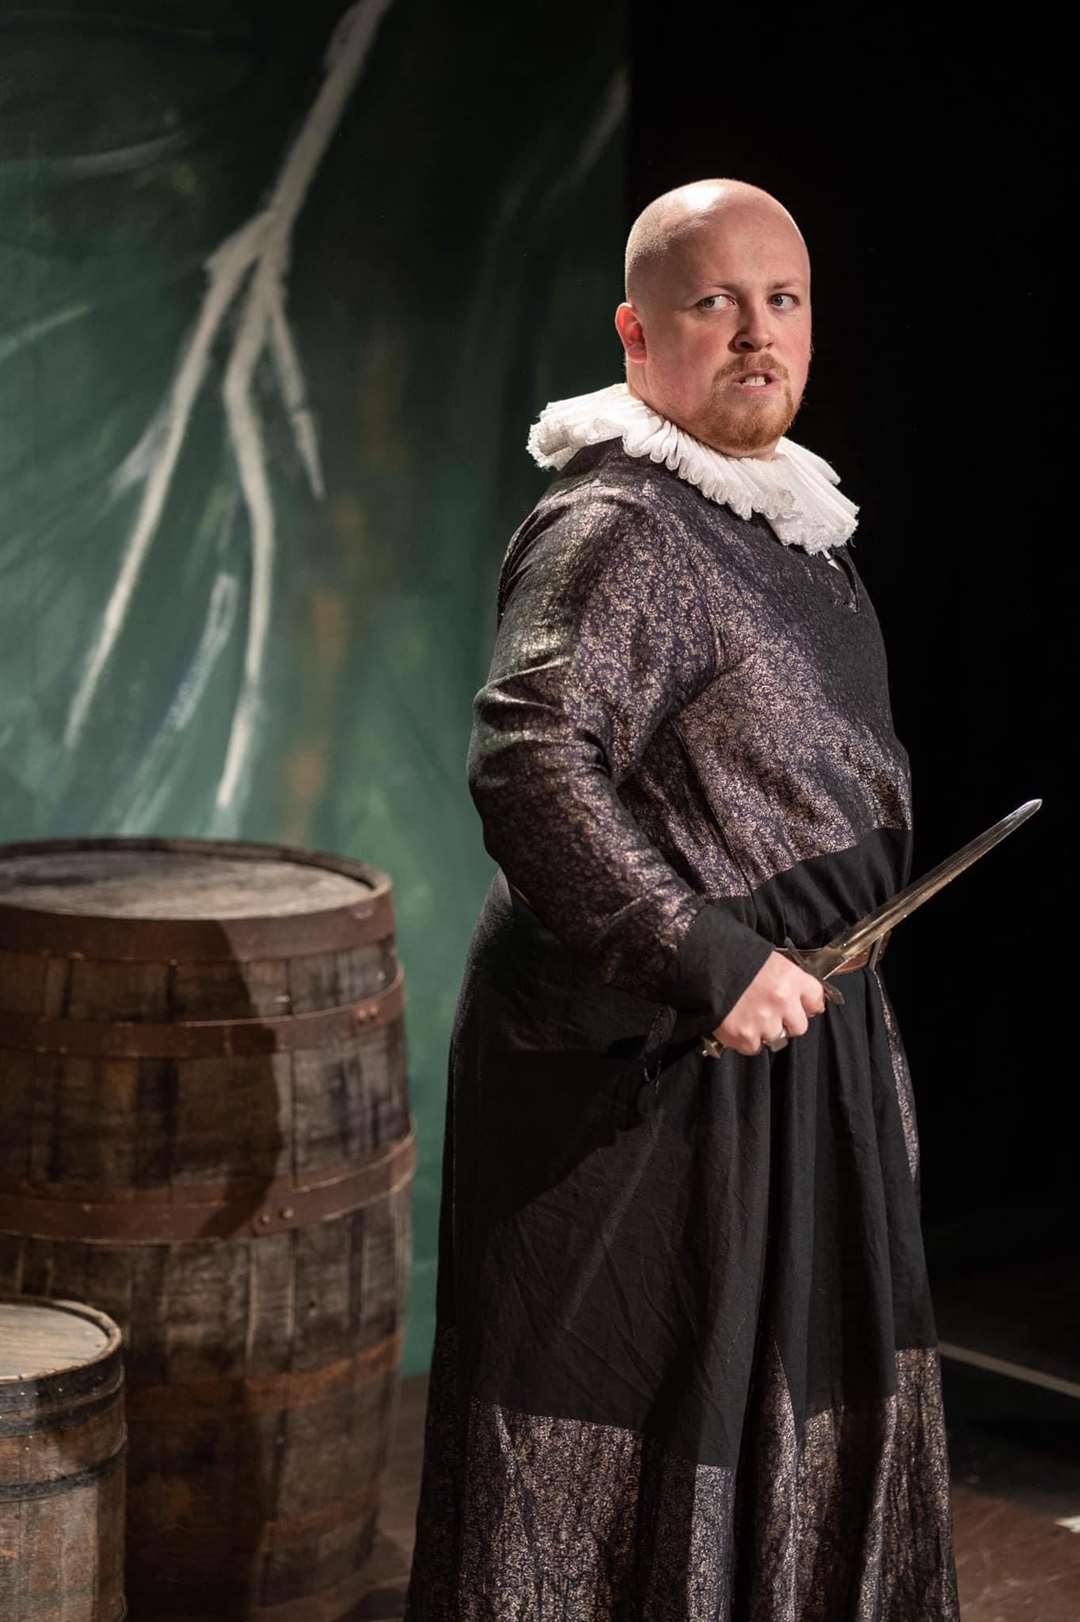 Sean MacGregor in the role of Lord Montague in Romeo and Juliet at the Attic Theatre in Stratford-upon-Avon. Picture: Andrew Maguire